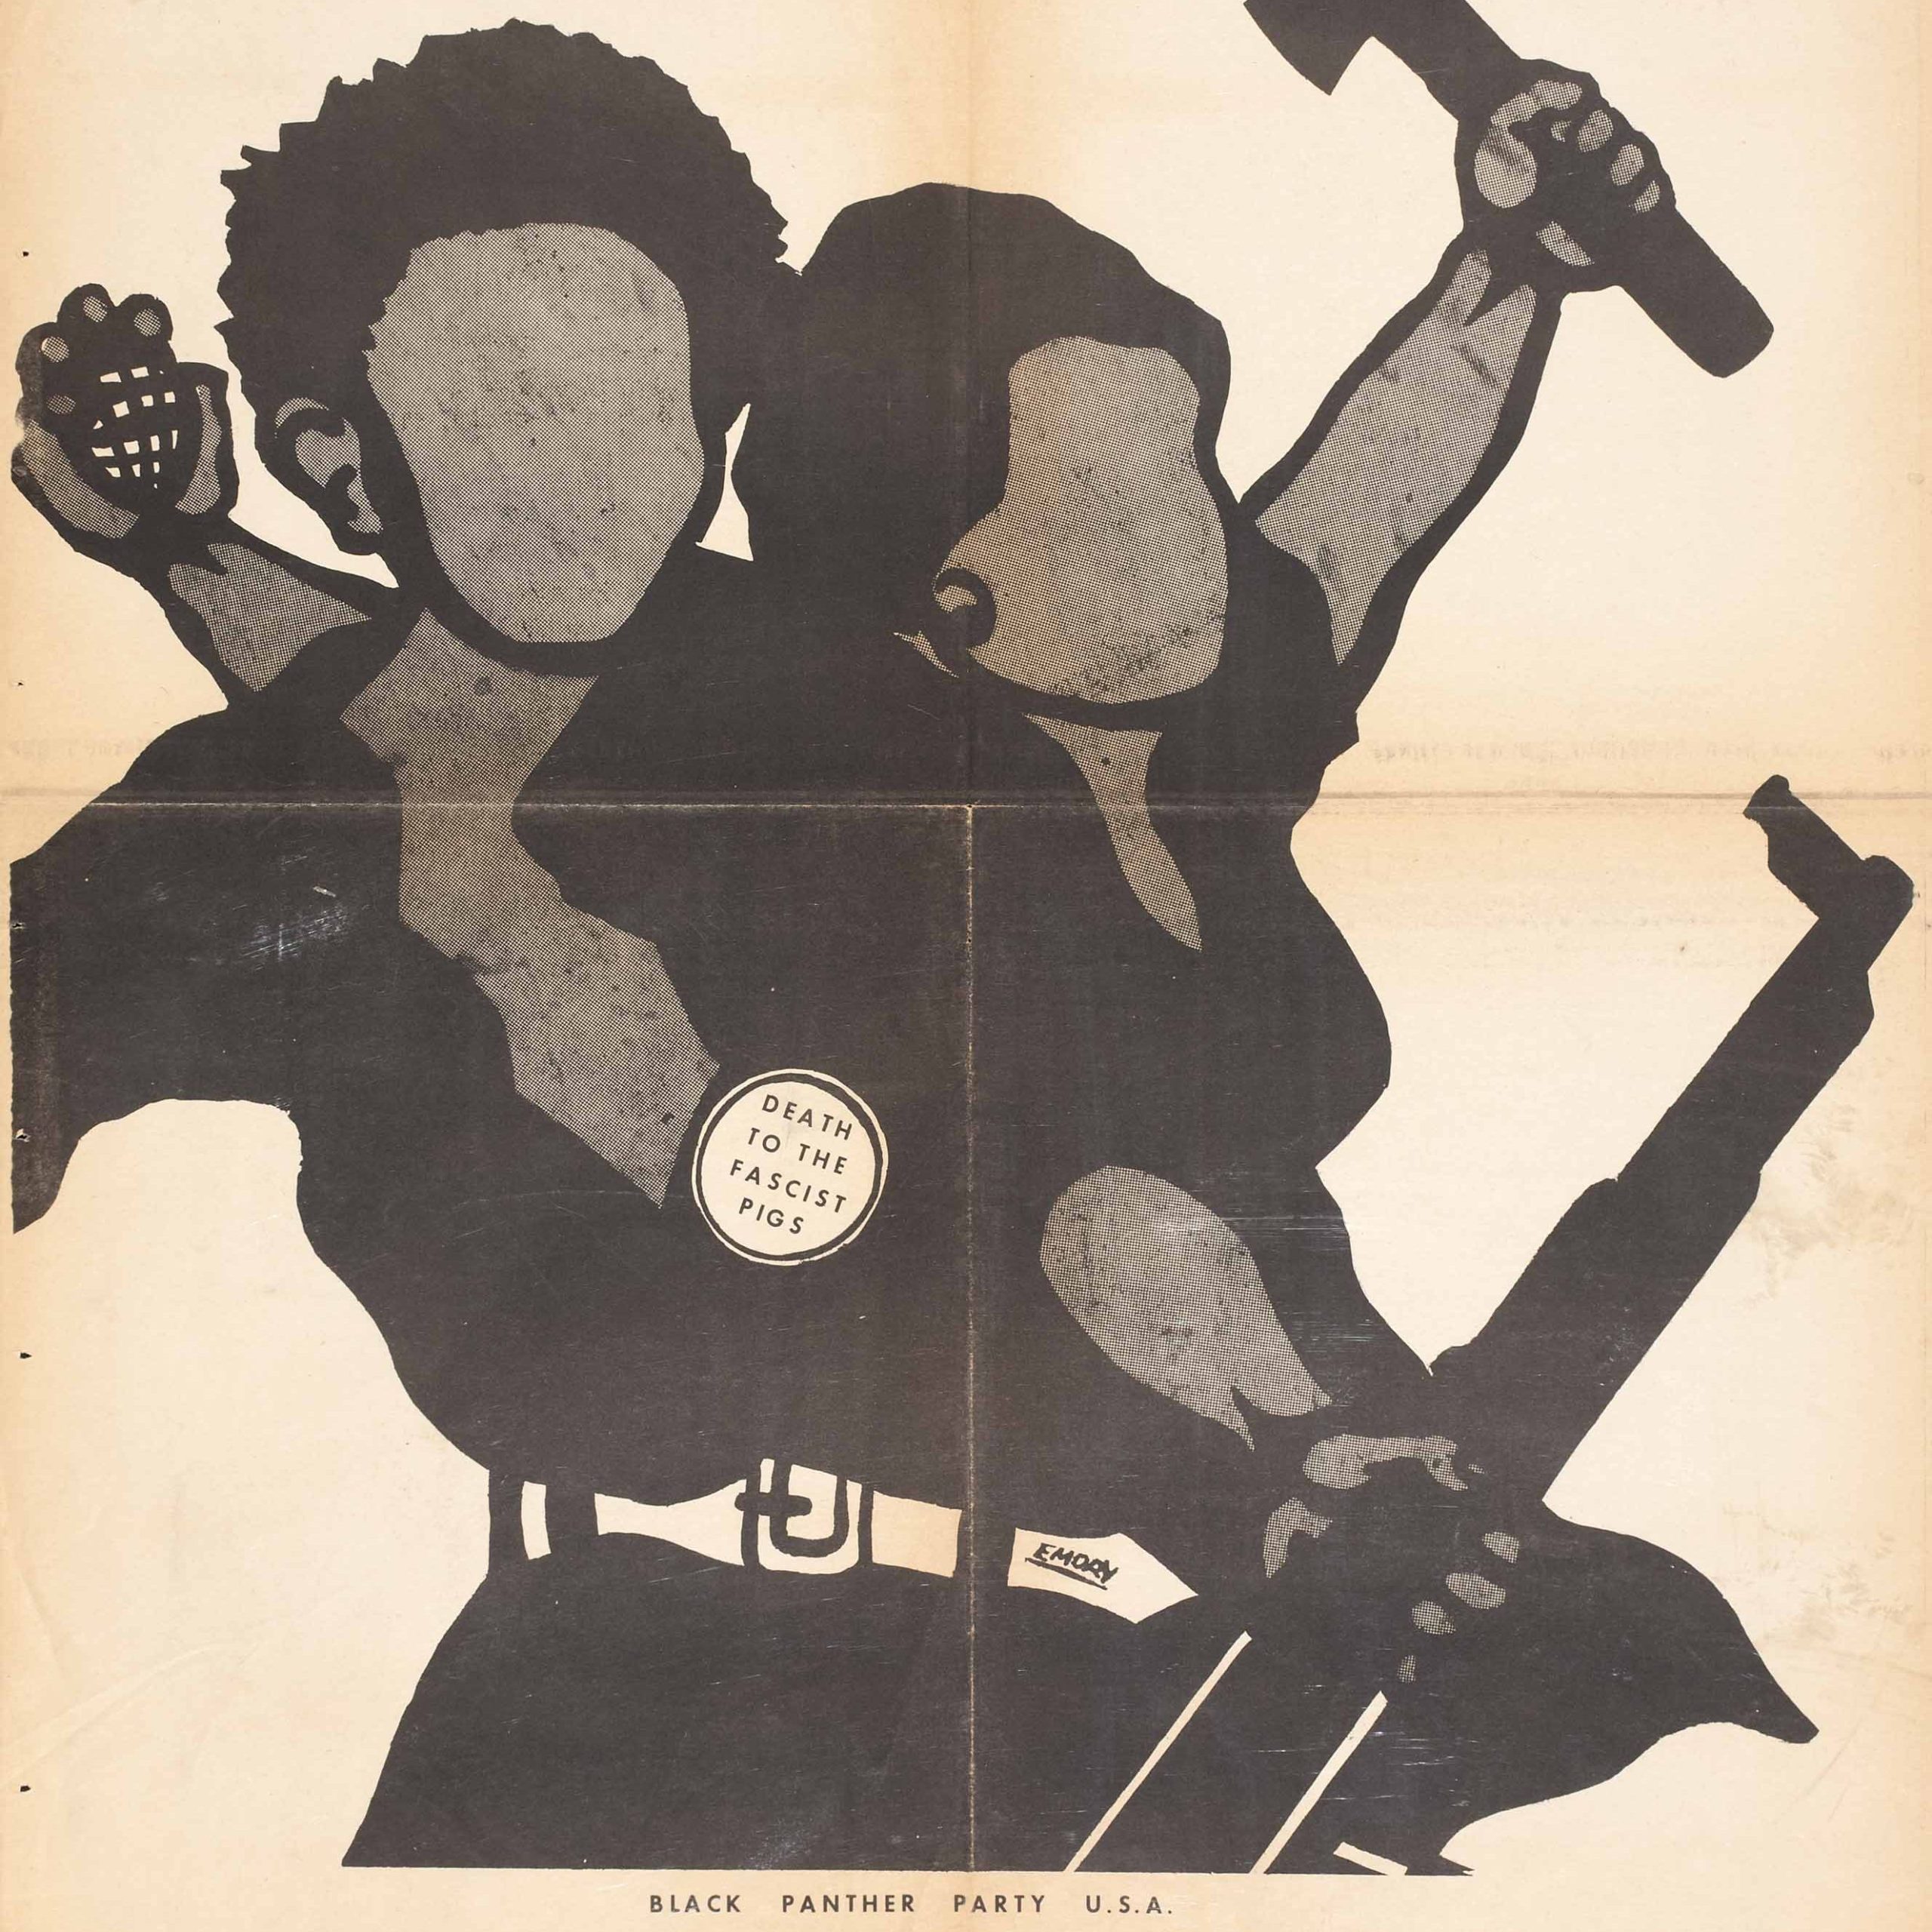 A poster image of two Black, female figures holding a rifle and a hatchet.